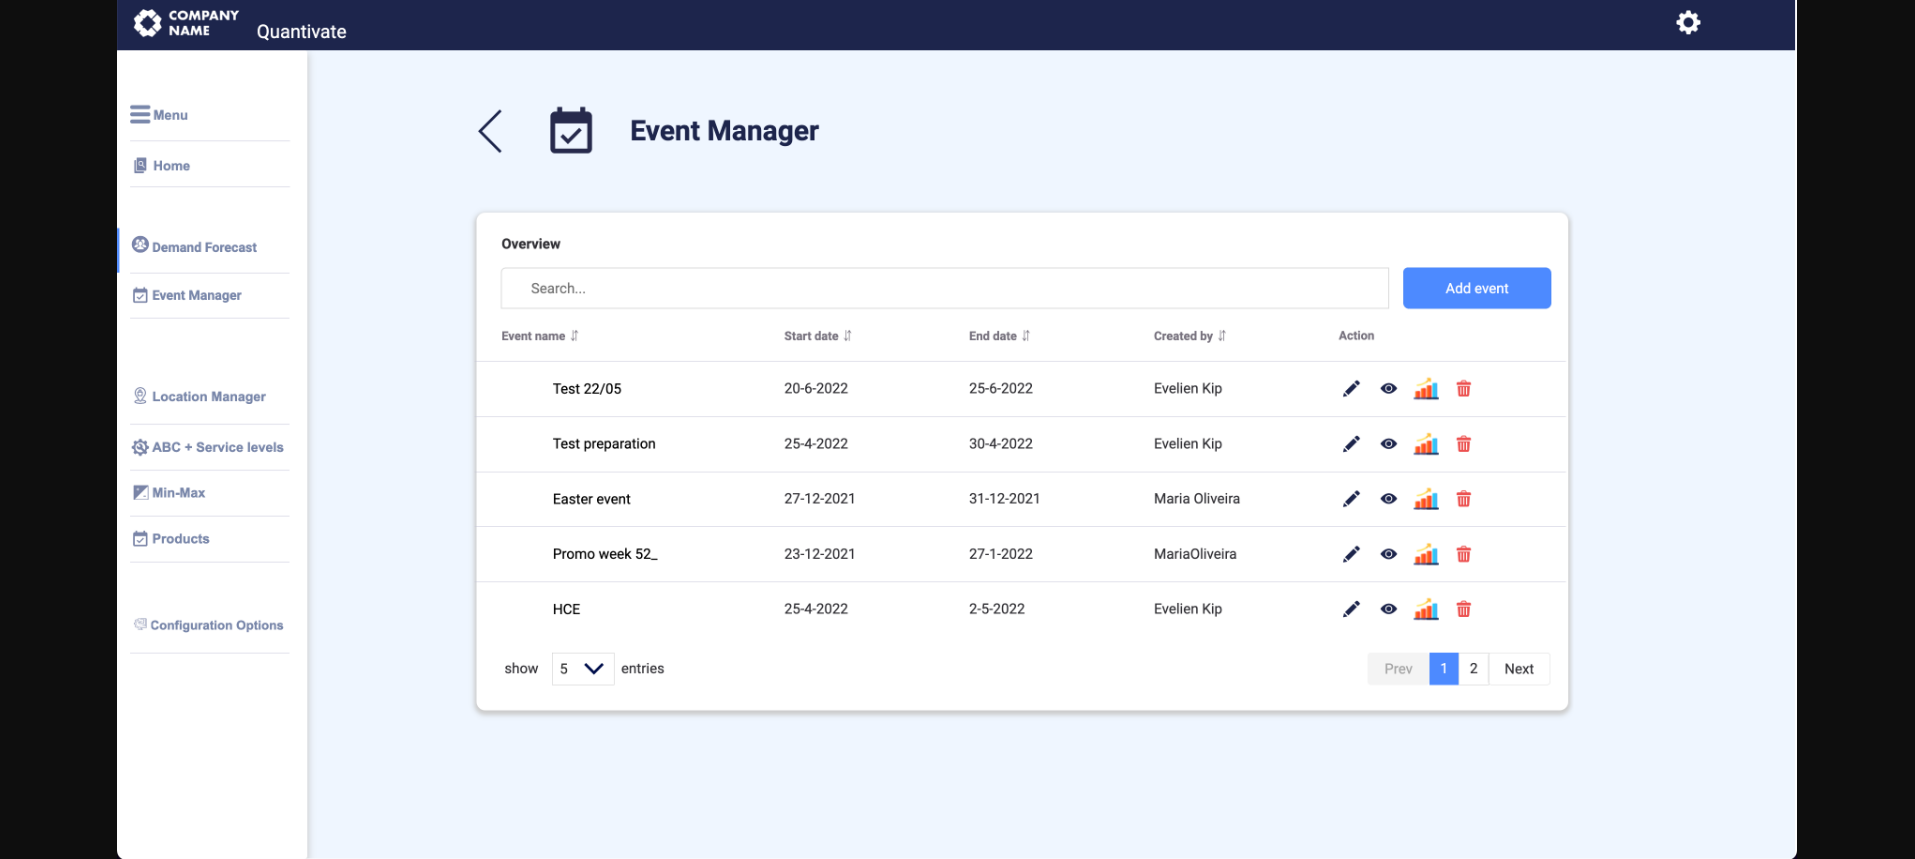 IG&H Quantivate Software - Event Manager Dashboard